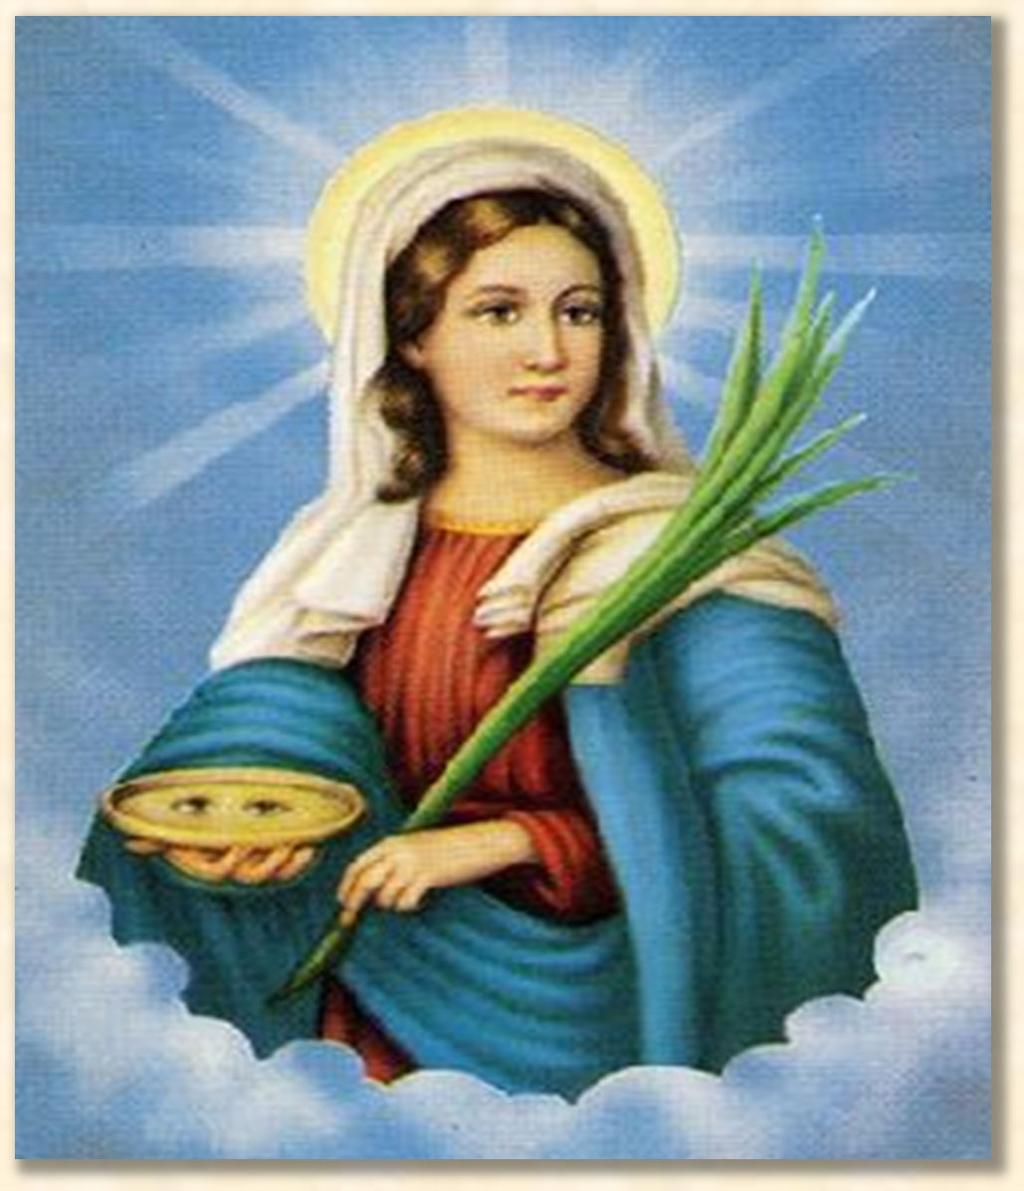 Holy N[m_ C[tholi] Chur]h NOVENA PRAYER TO ST. LUCY PATRONESS OF EYE SICKNESS November 20, 2015, at 6:30pm WELCOME NEW MEMBERS BIENVENIDOS NUEVOS MIEMBROS Please register at the church office.